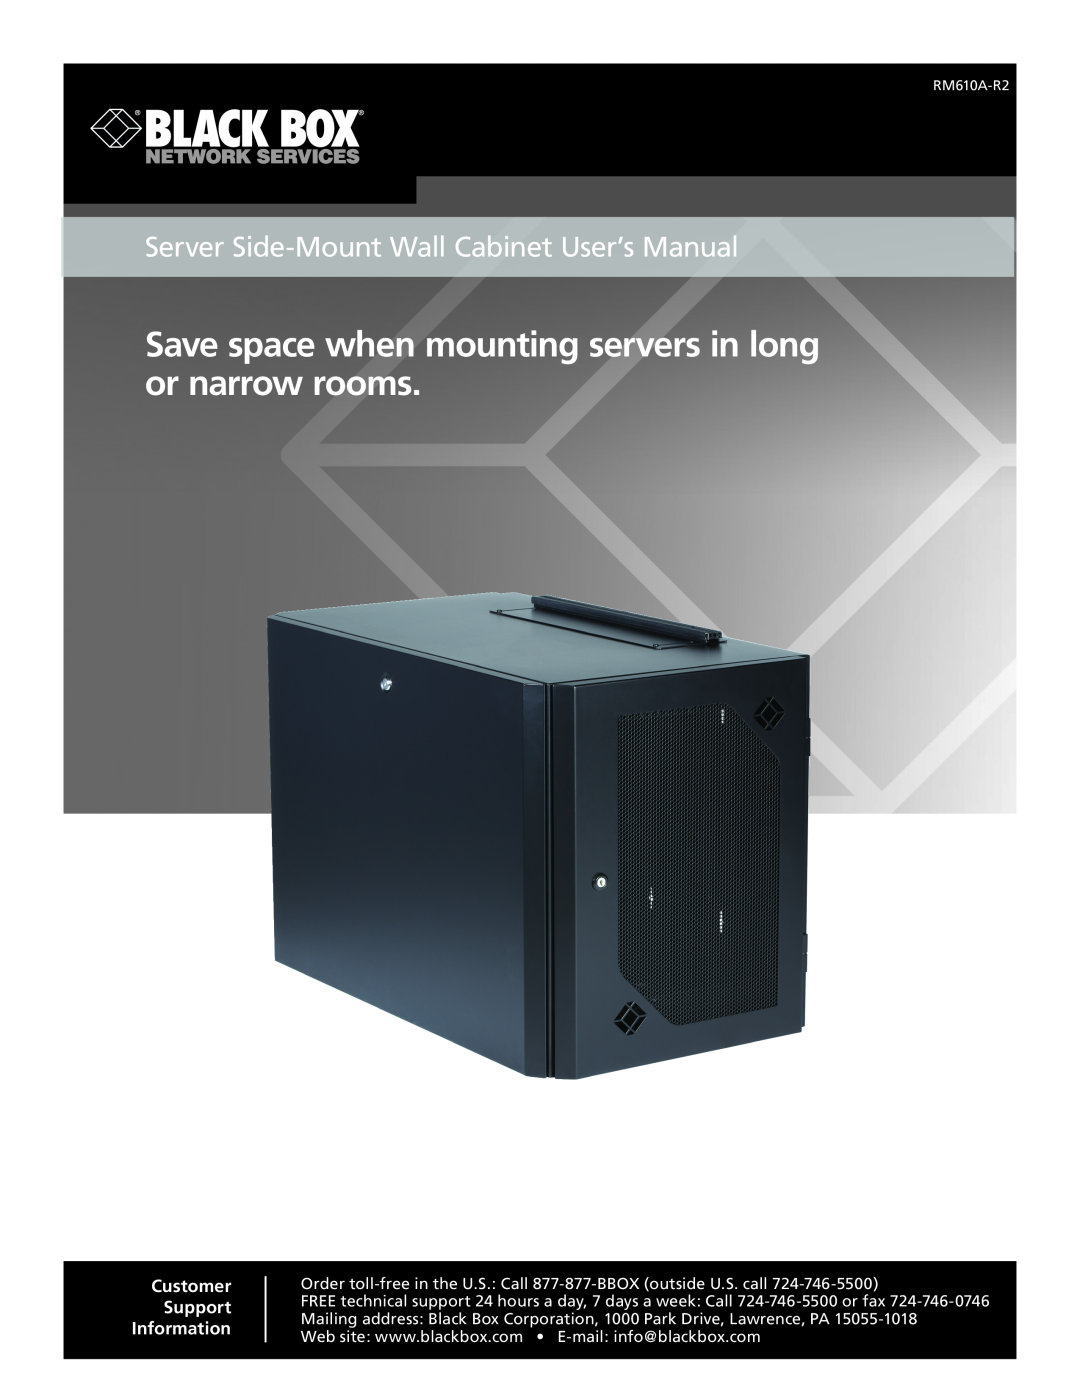 Black Box Server Side-Mount Wall Cabinet, RM610A-R2 user manual Server Side-MountWall Cabinet User’s Manual 